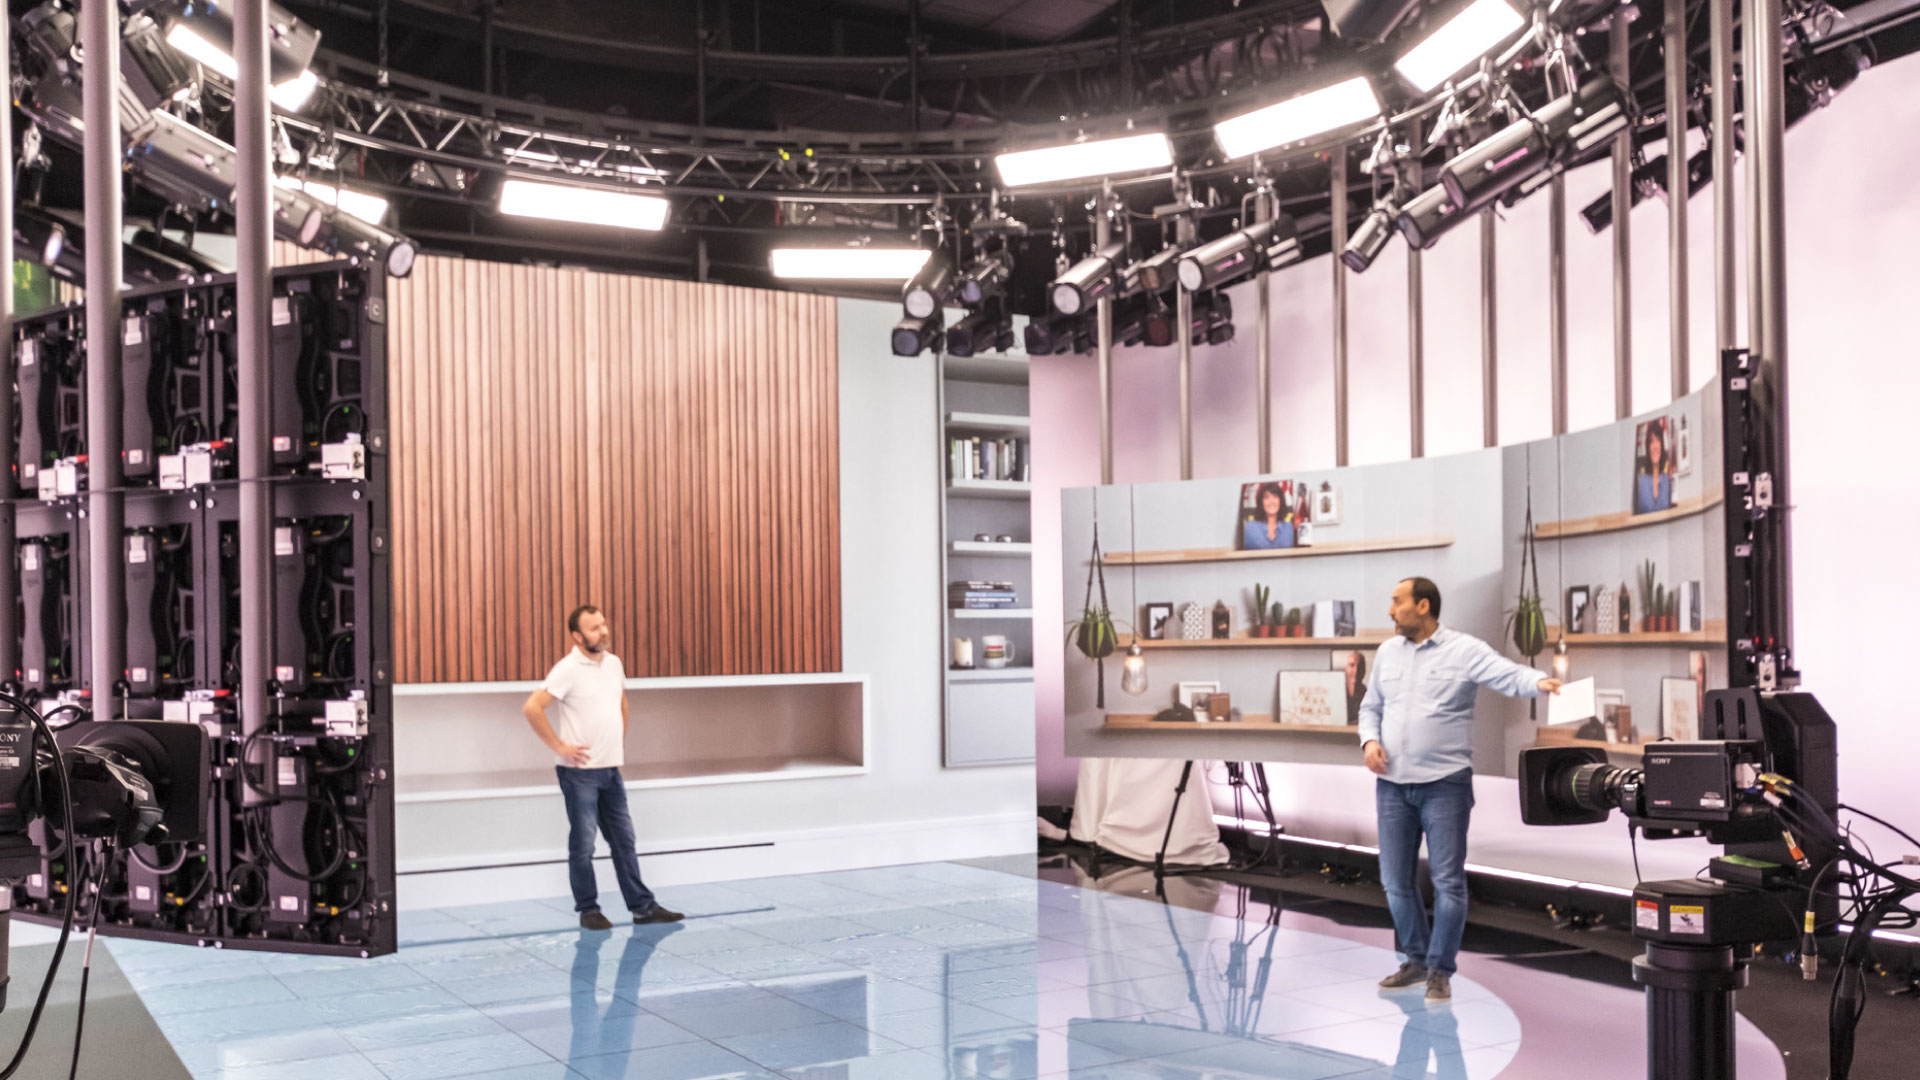 PRG equips the TV studio with first-class and flexibly adaptable event technology! You are looking for a technical partner for your next TV & film production! Contact our PRG team!